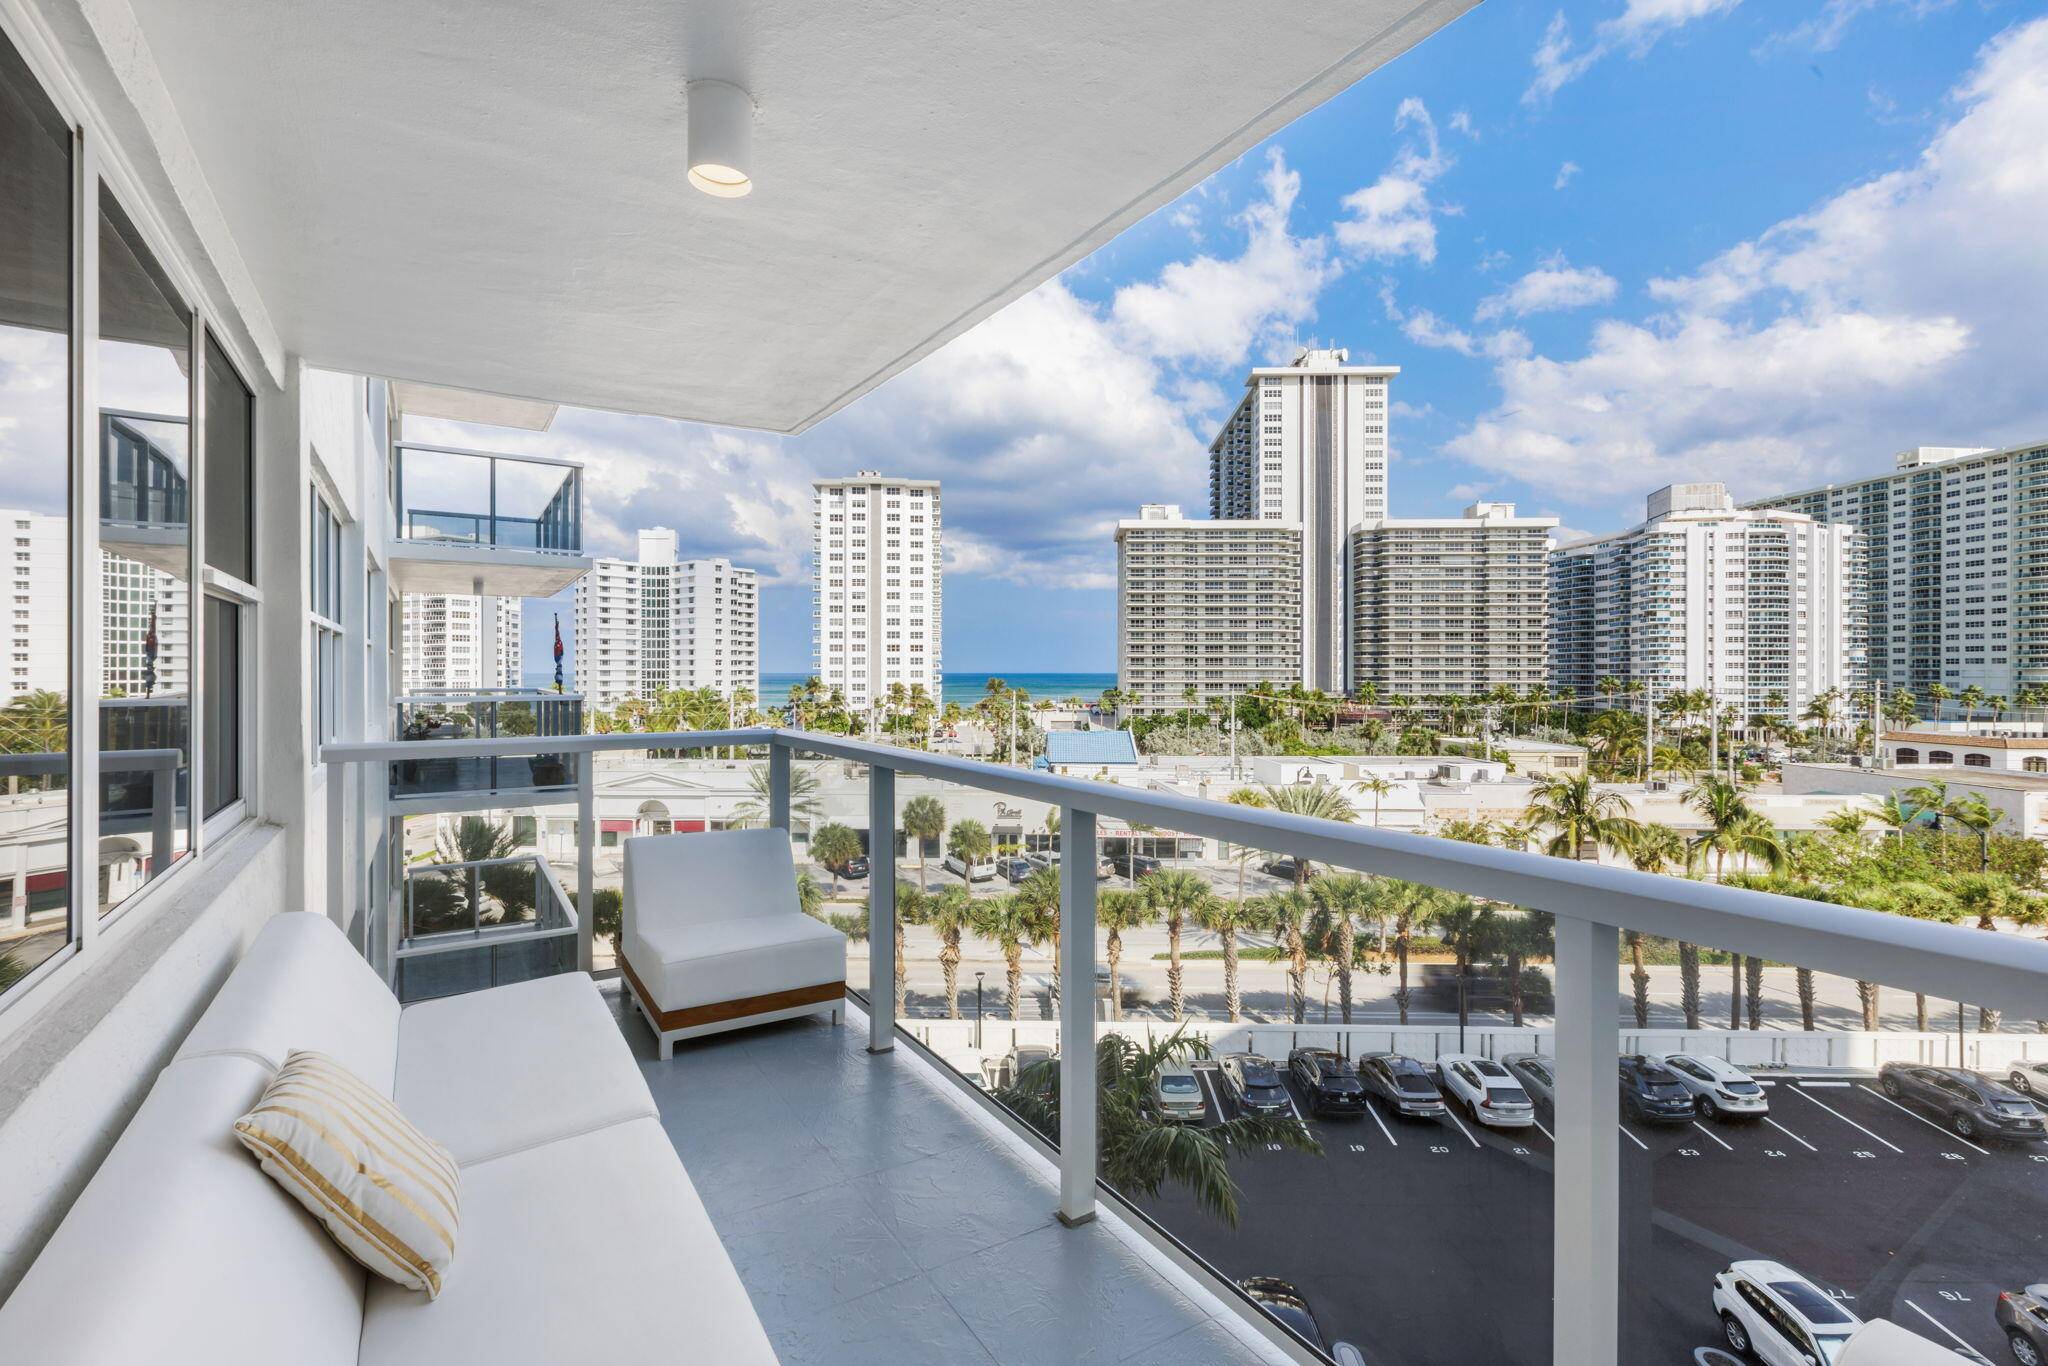 Experience the epitome of South Florida luxury living in this meticulously upgraded 2 bedroom, 2 bathroom residence at Coral Ridge Towers East.